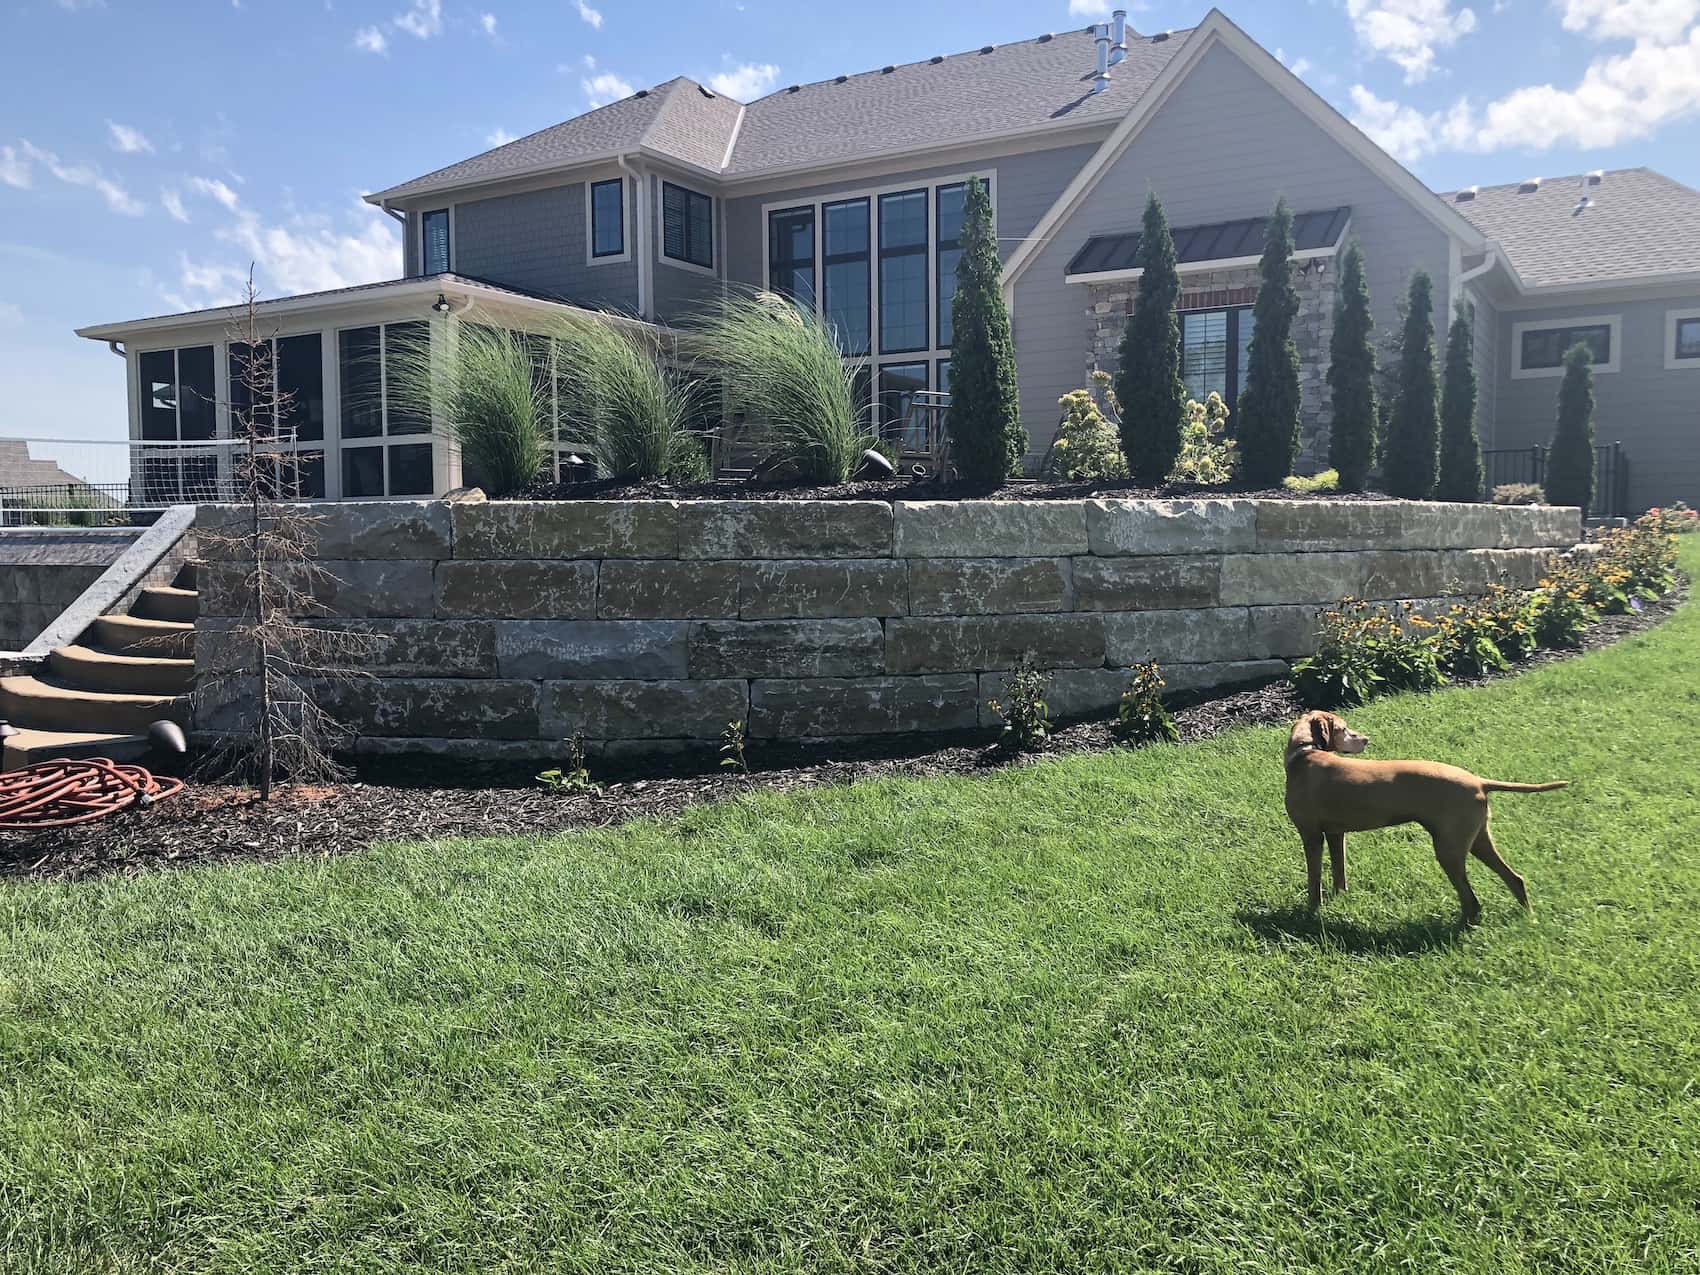 newly built retaining wall in front of house with dog in the green grass